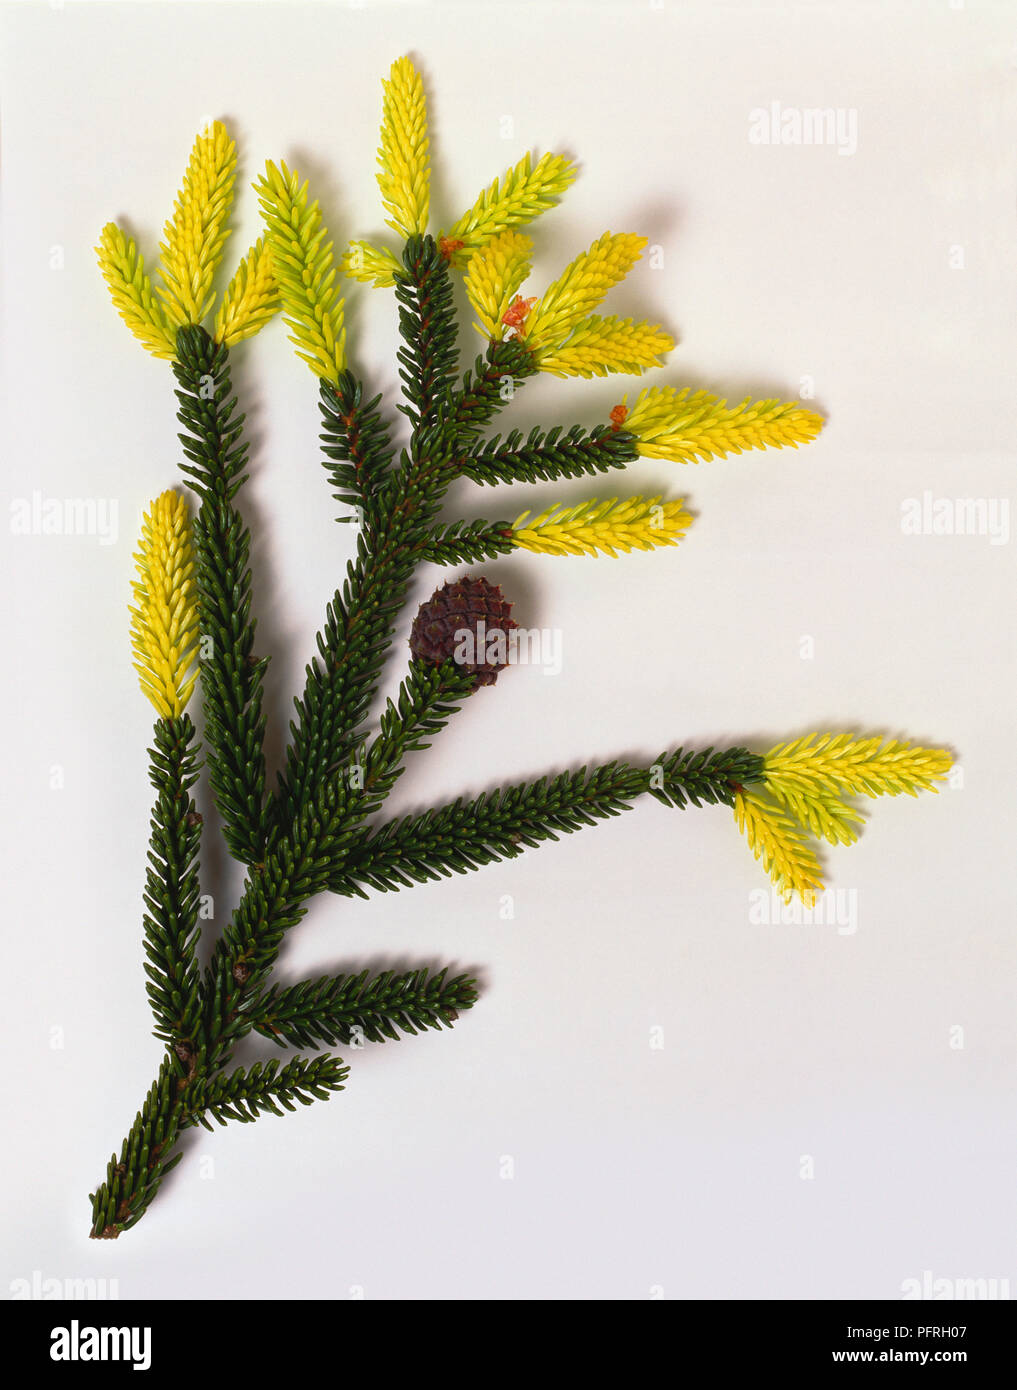 Picea orientalis 'Aurea' (Oriental spruce), stem with green and yellow leaves Stock Photo